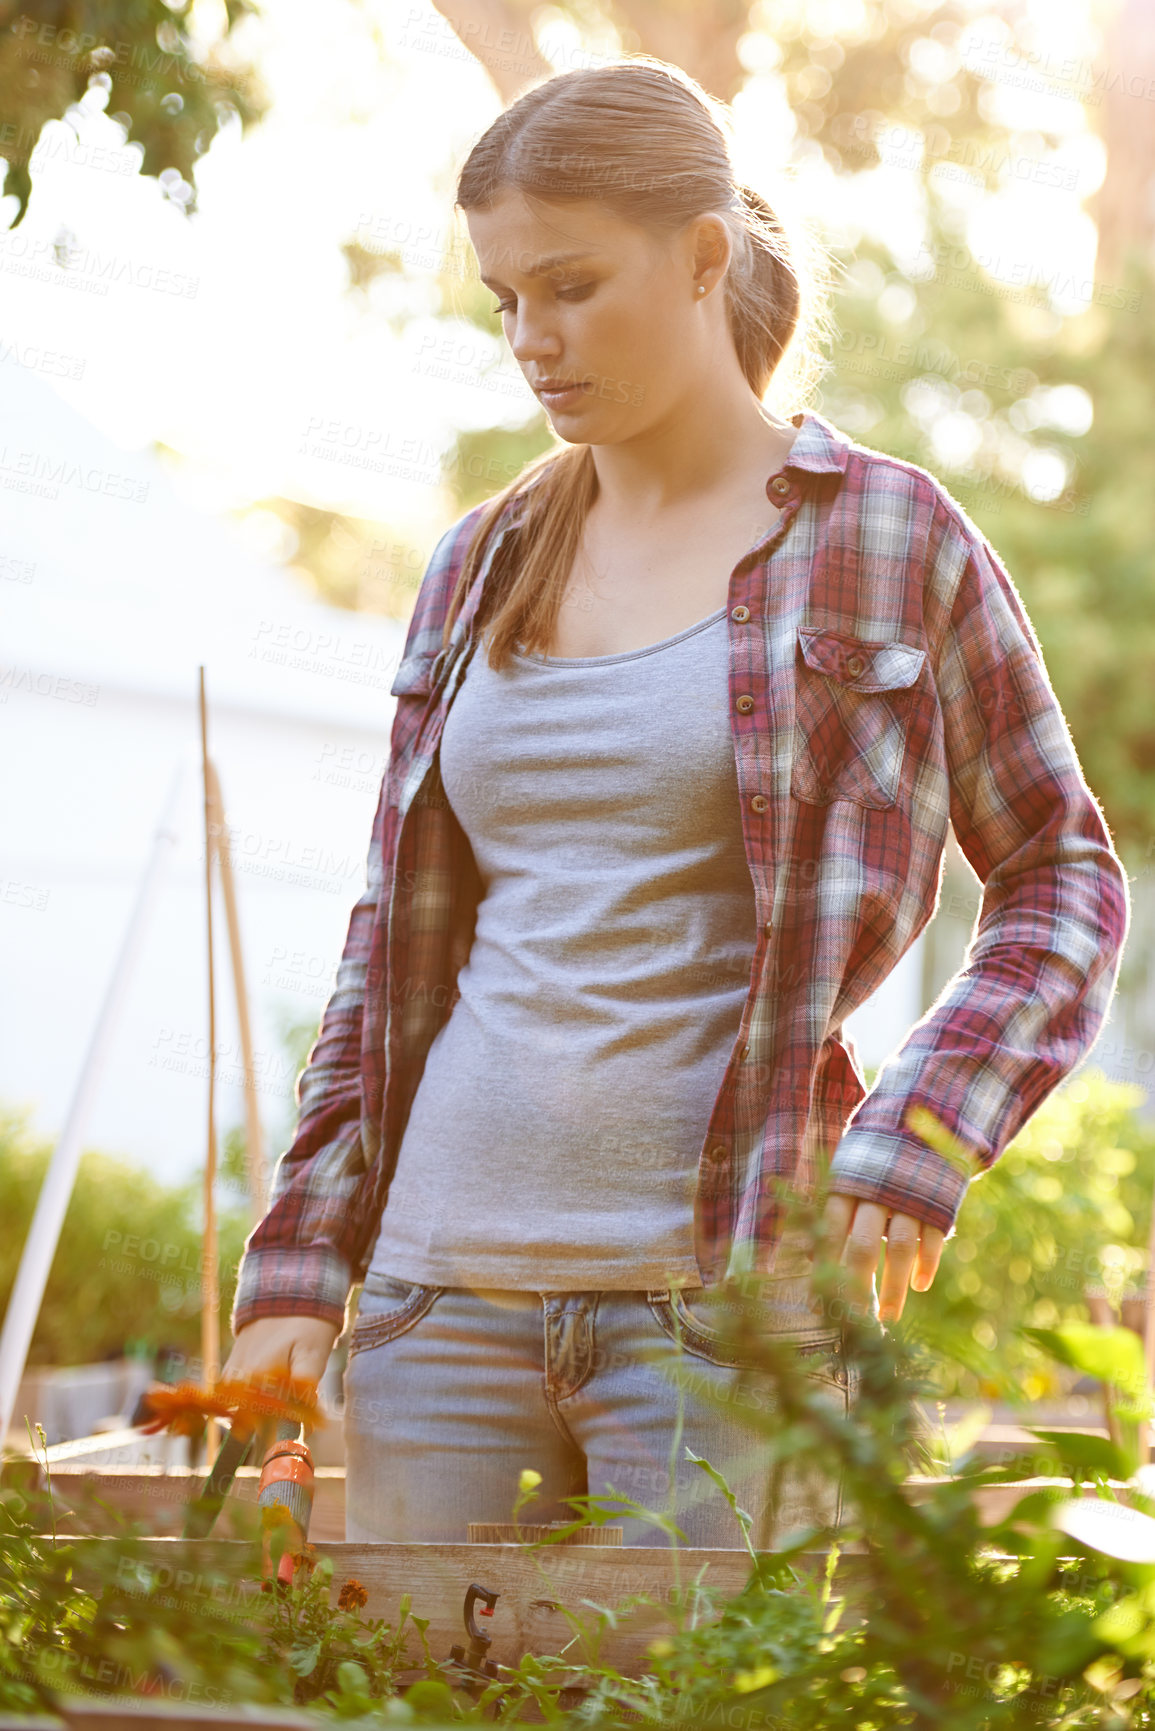 Buy stock photo Thinking, garden and vegetables with woman, nature or harvest with summer, outdoor or nutrition. Hobby, person or girl with tools or plants with backyard or environment with sunshine, vegan or choice